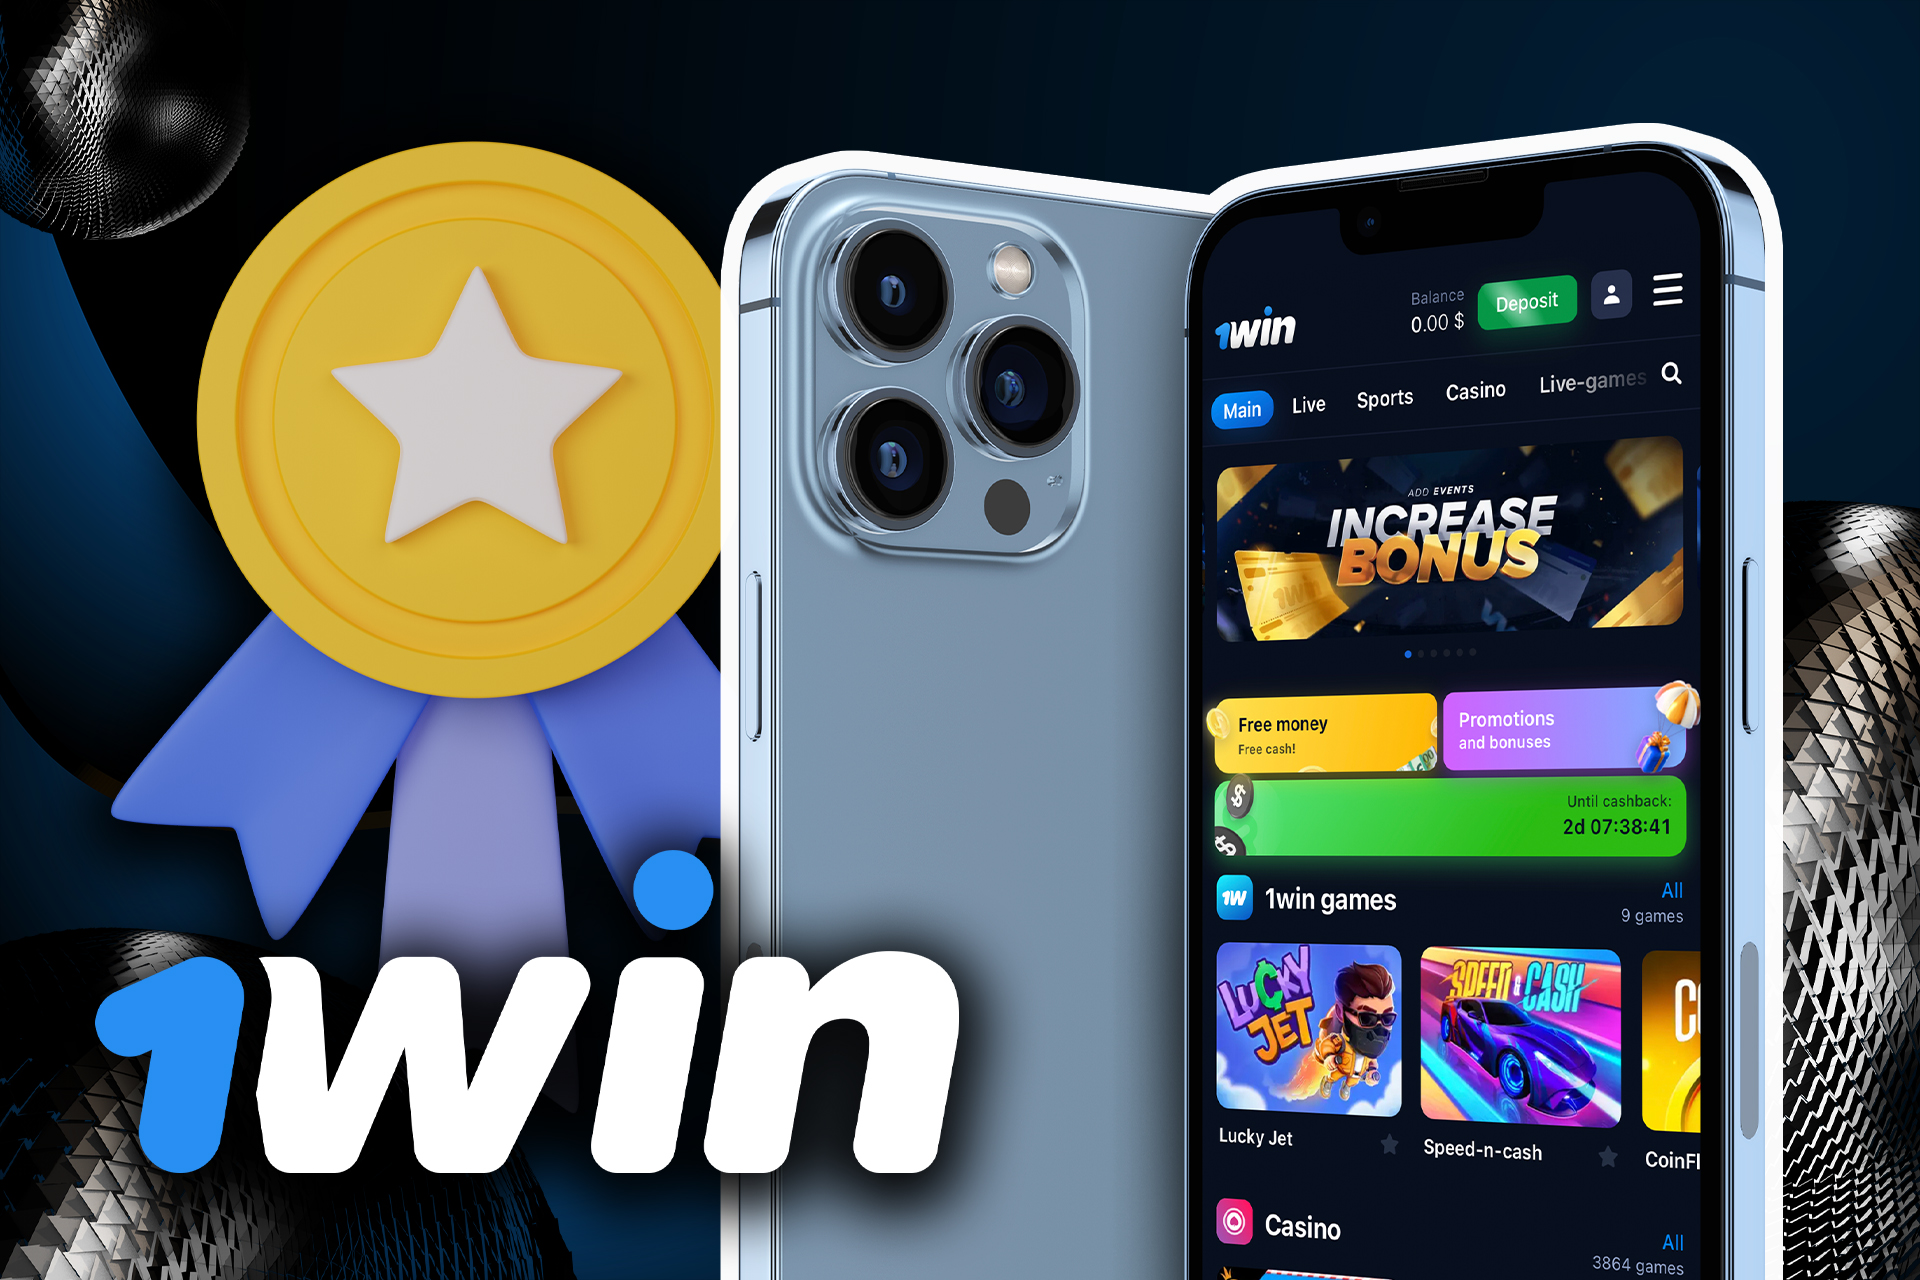 1win app has its own benefits such as generous bonuses, high speed and notifications.